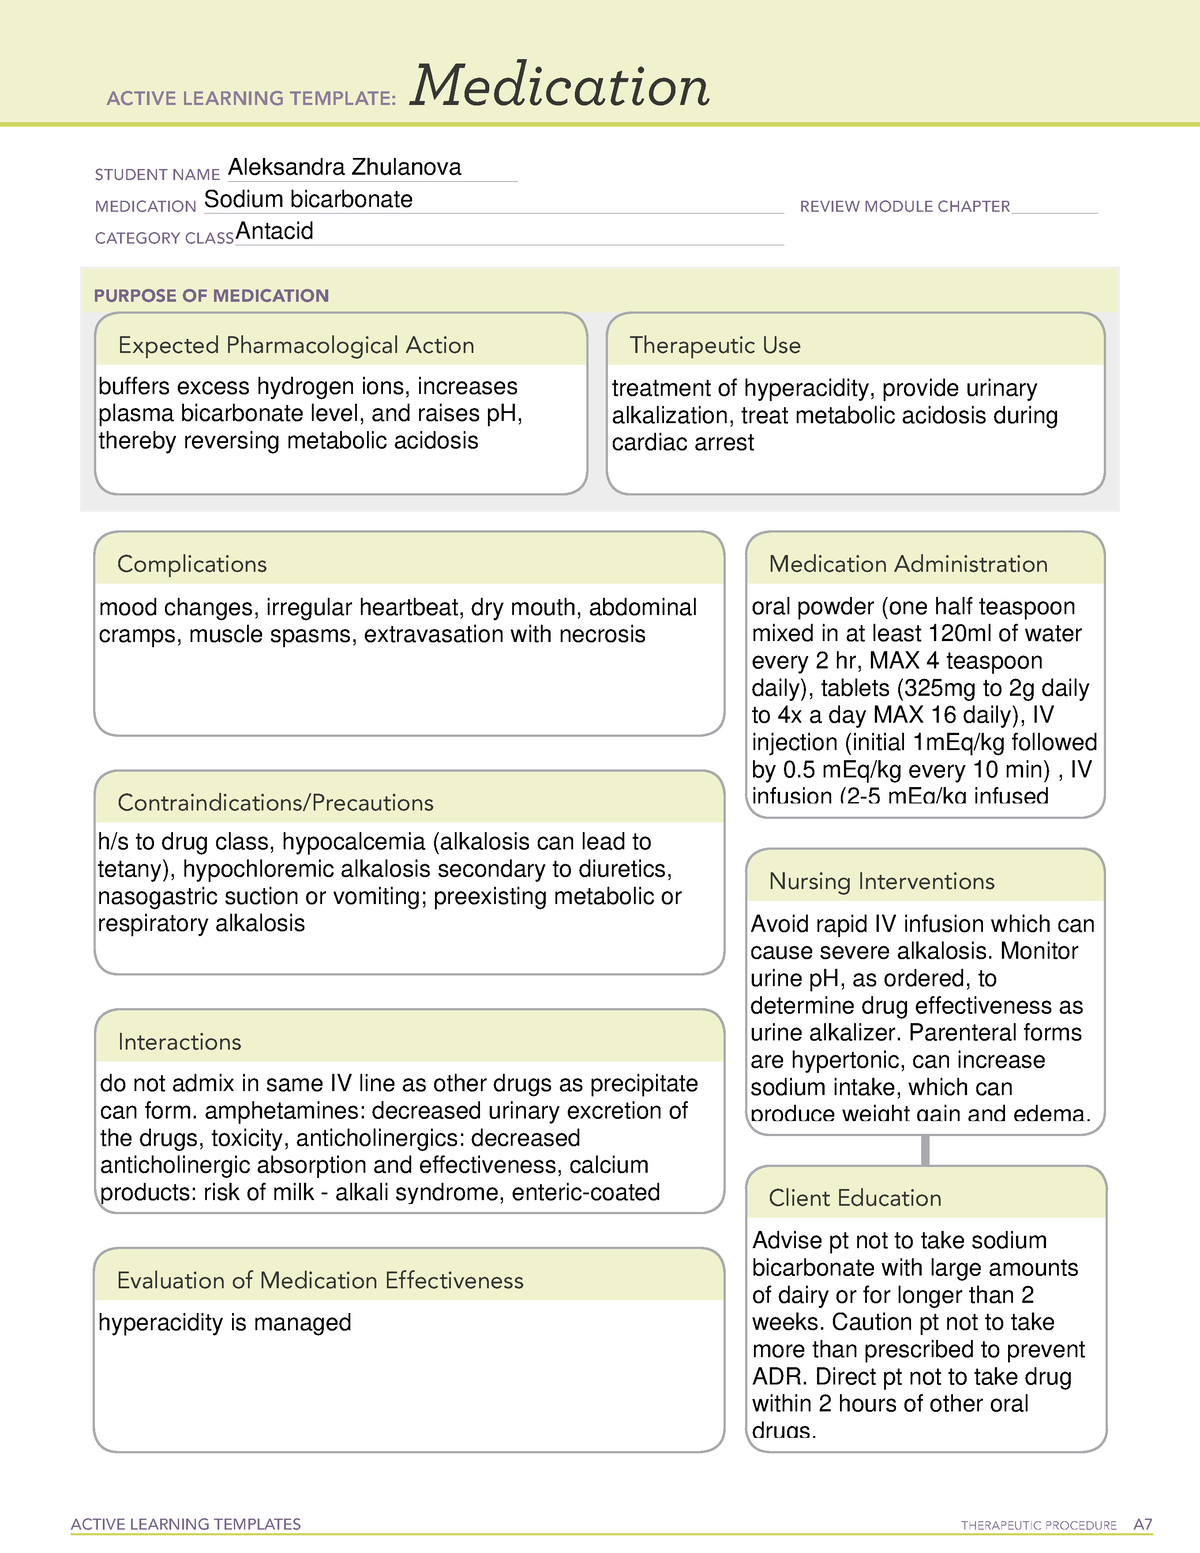 Sodium bicarbonate1 Drug template ACTIVE LEARNING TEMPLATES